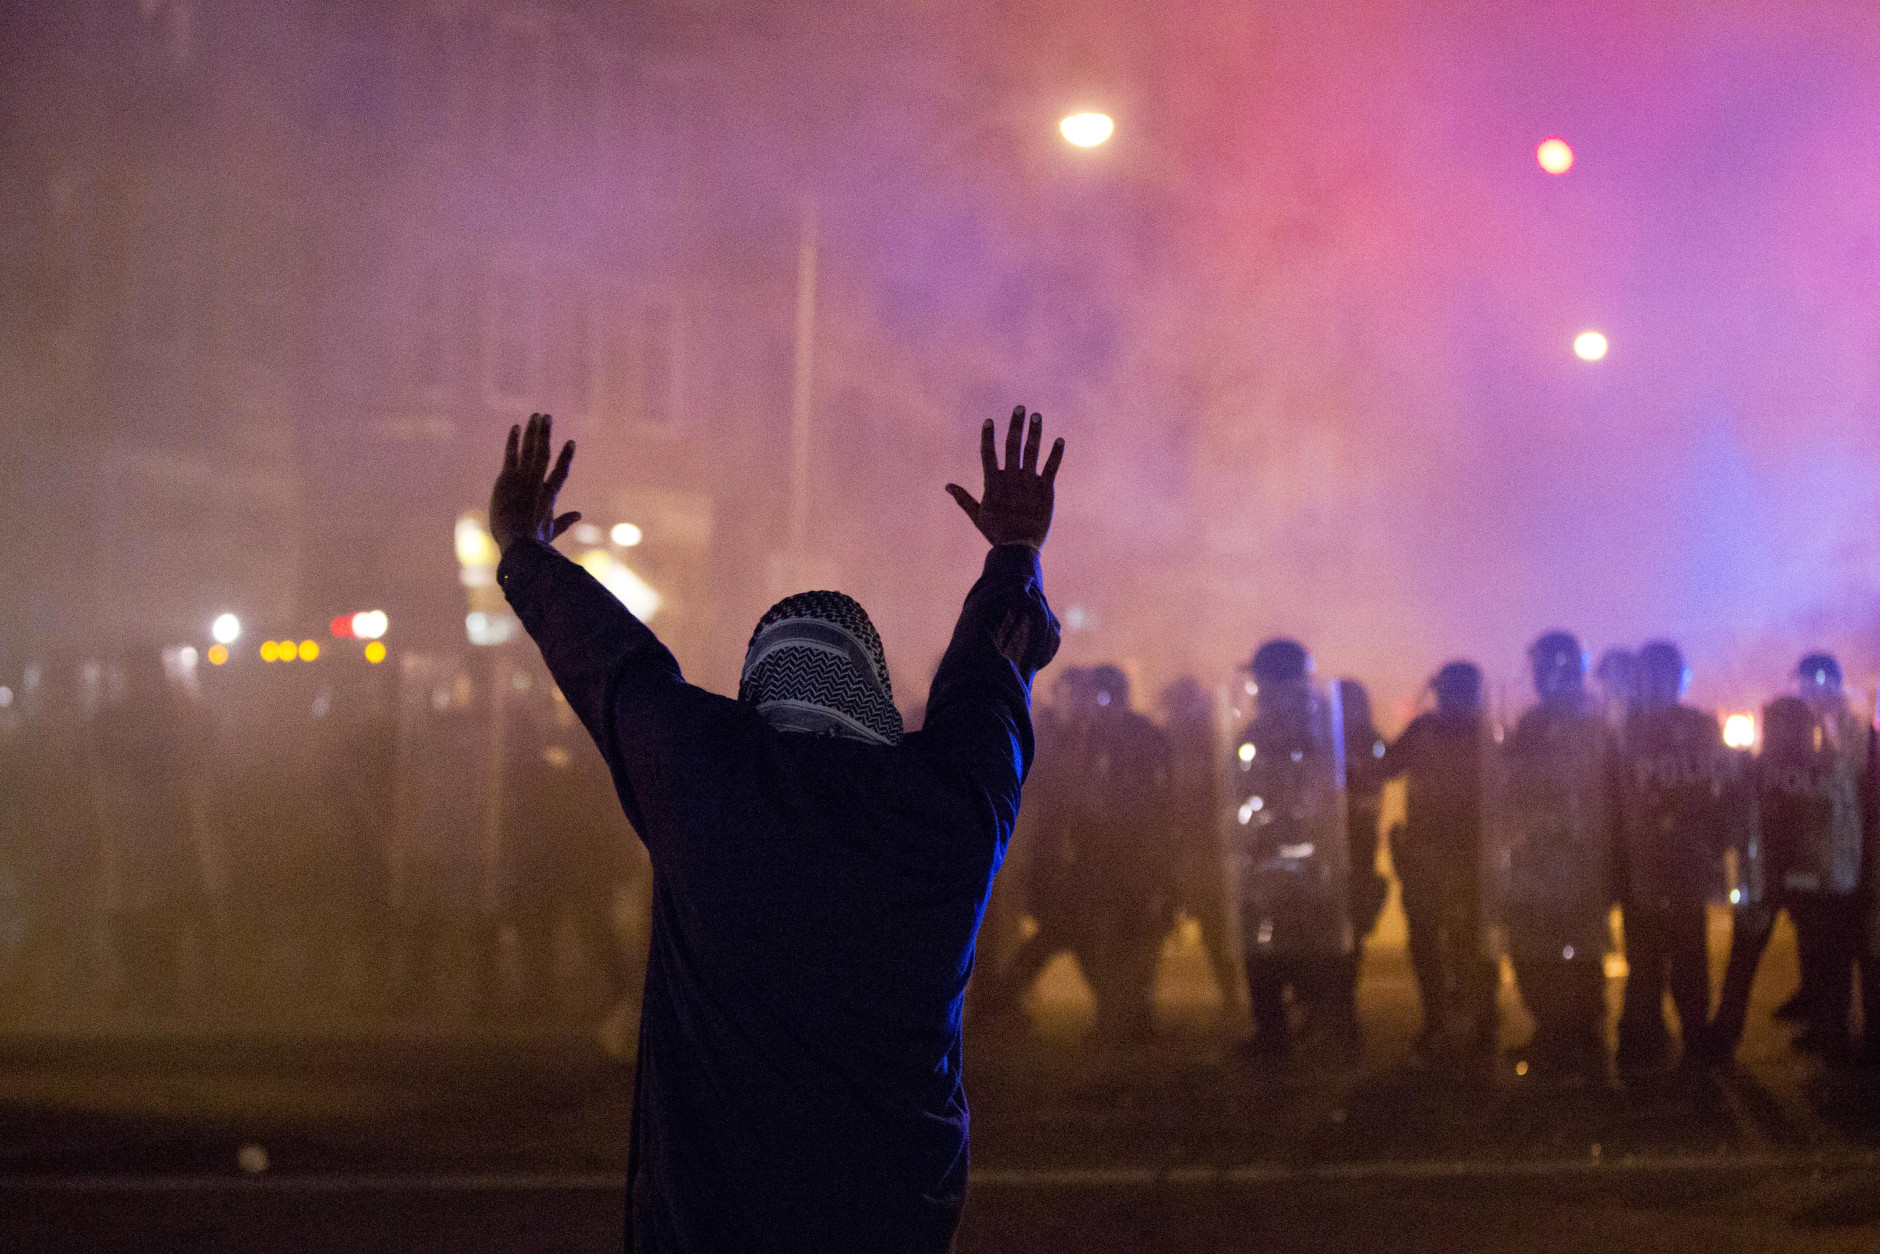 A protestor faces police enforcing a curfew Tuesday, April 28, 2015, in Baltimore. A line of police behind riot shields hurled smoke grenades and fired pepper balls at dozens of protesters to enforce a citywide curfew. (AP Photo/Matt Rourke)